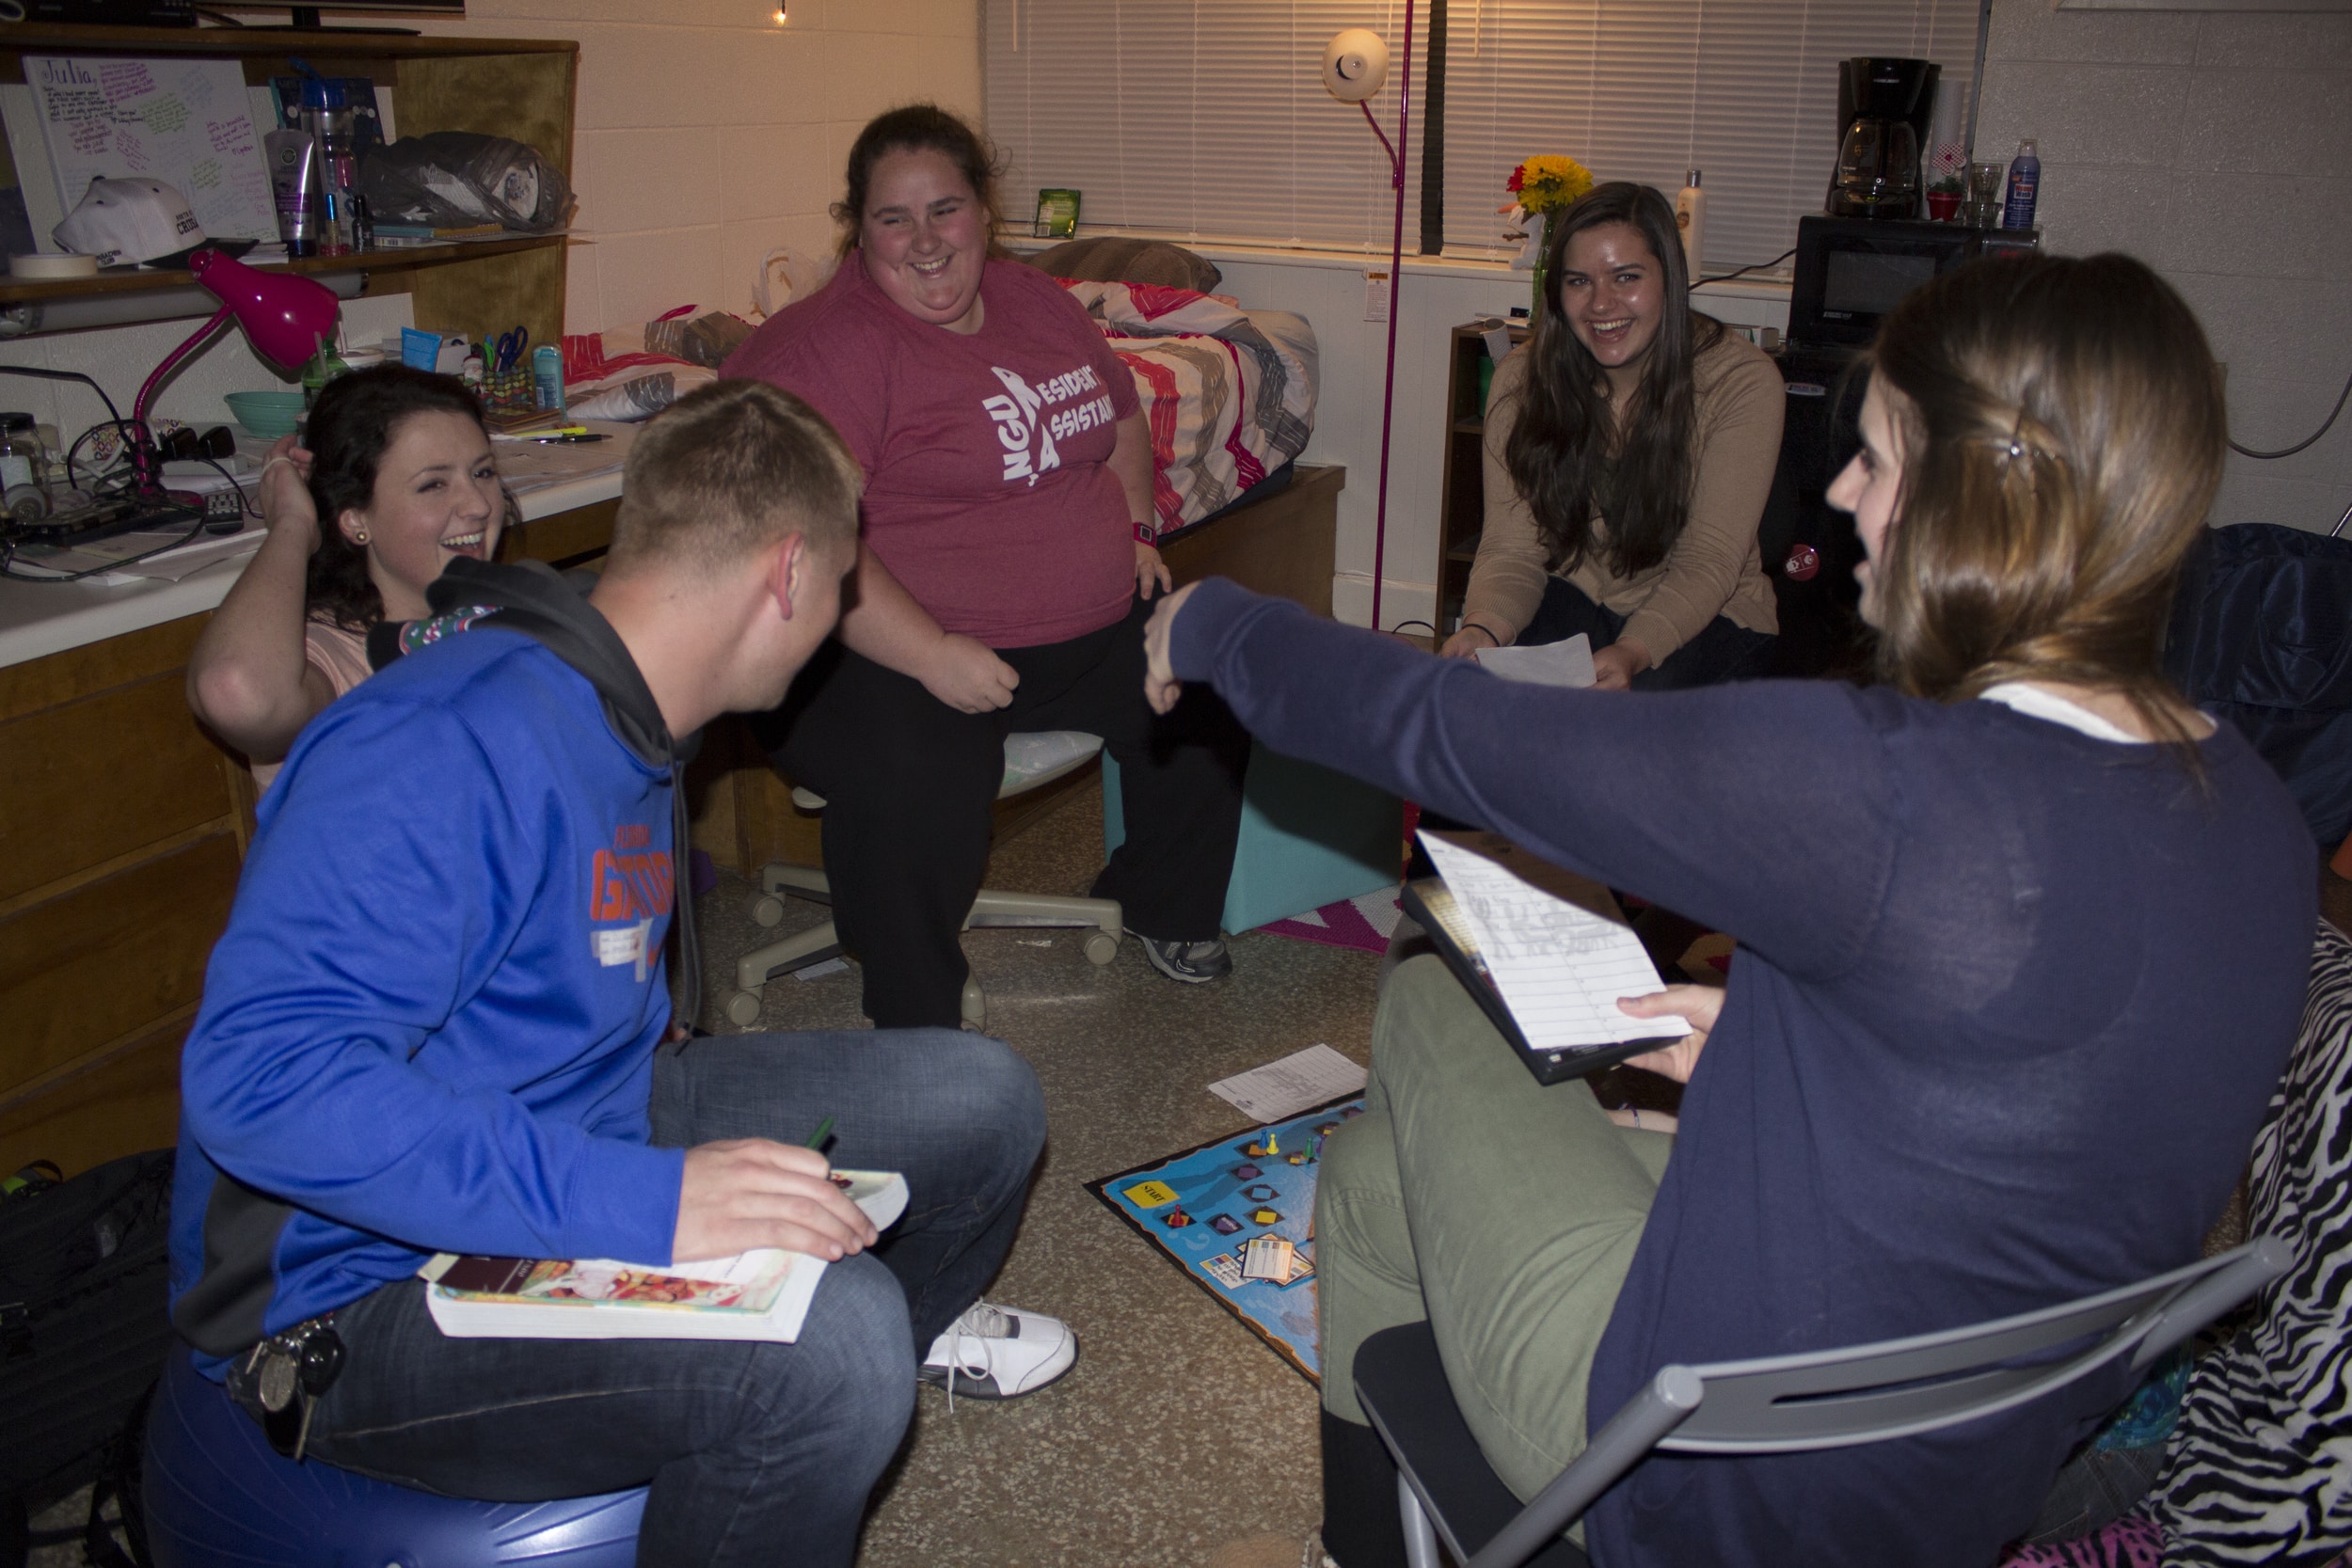  NGU students enjoy using open dorms as a chance to&nbsp;gather&nbsp;together to play some board games, laugh and just chat with each other in a different location than simply around campus at places such as the stud. Sophomore Sarah Garrett invited 